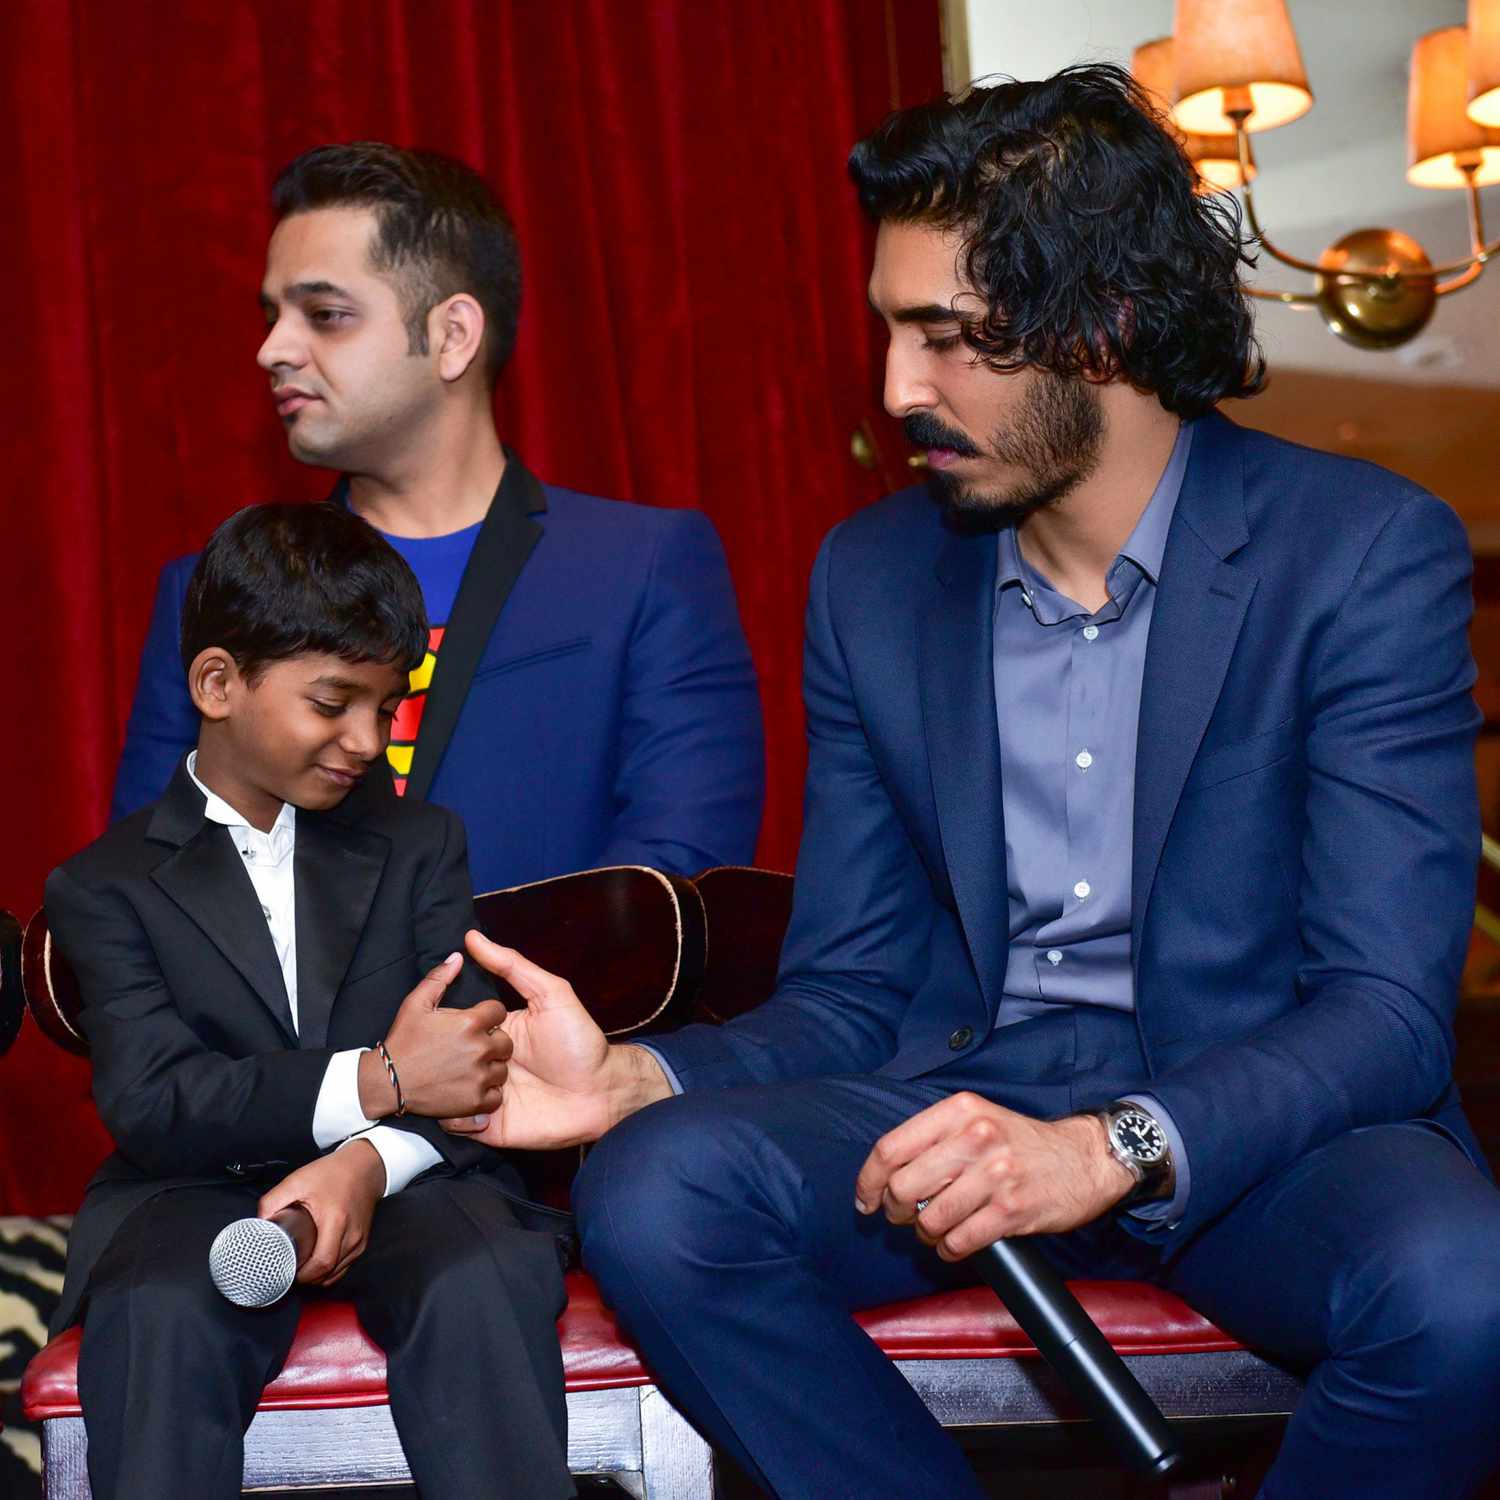 Sunny Pawar and Dev Patel at a Screening and Reception for Lion&nbsp;at The Monkey Bar in New York City&nbsp;on January 4, 2017